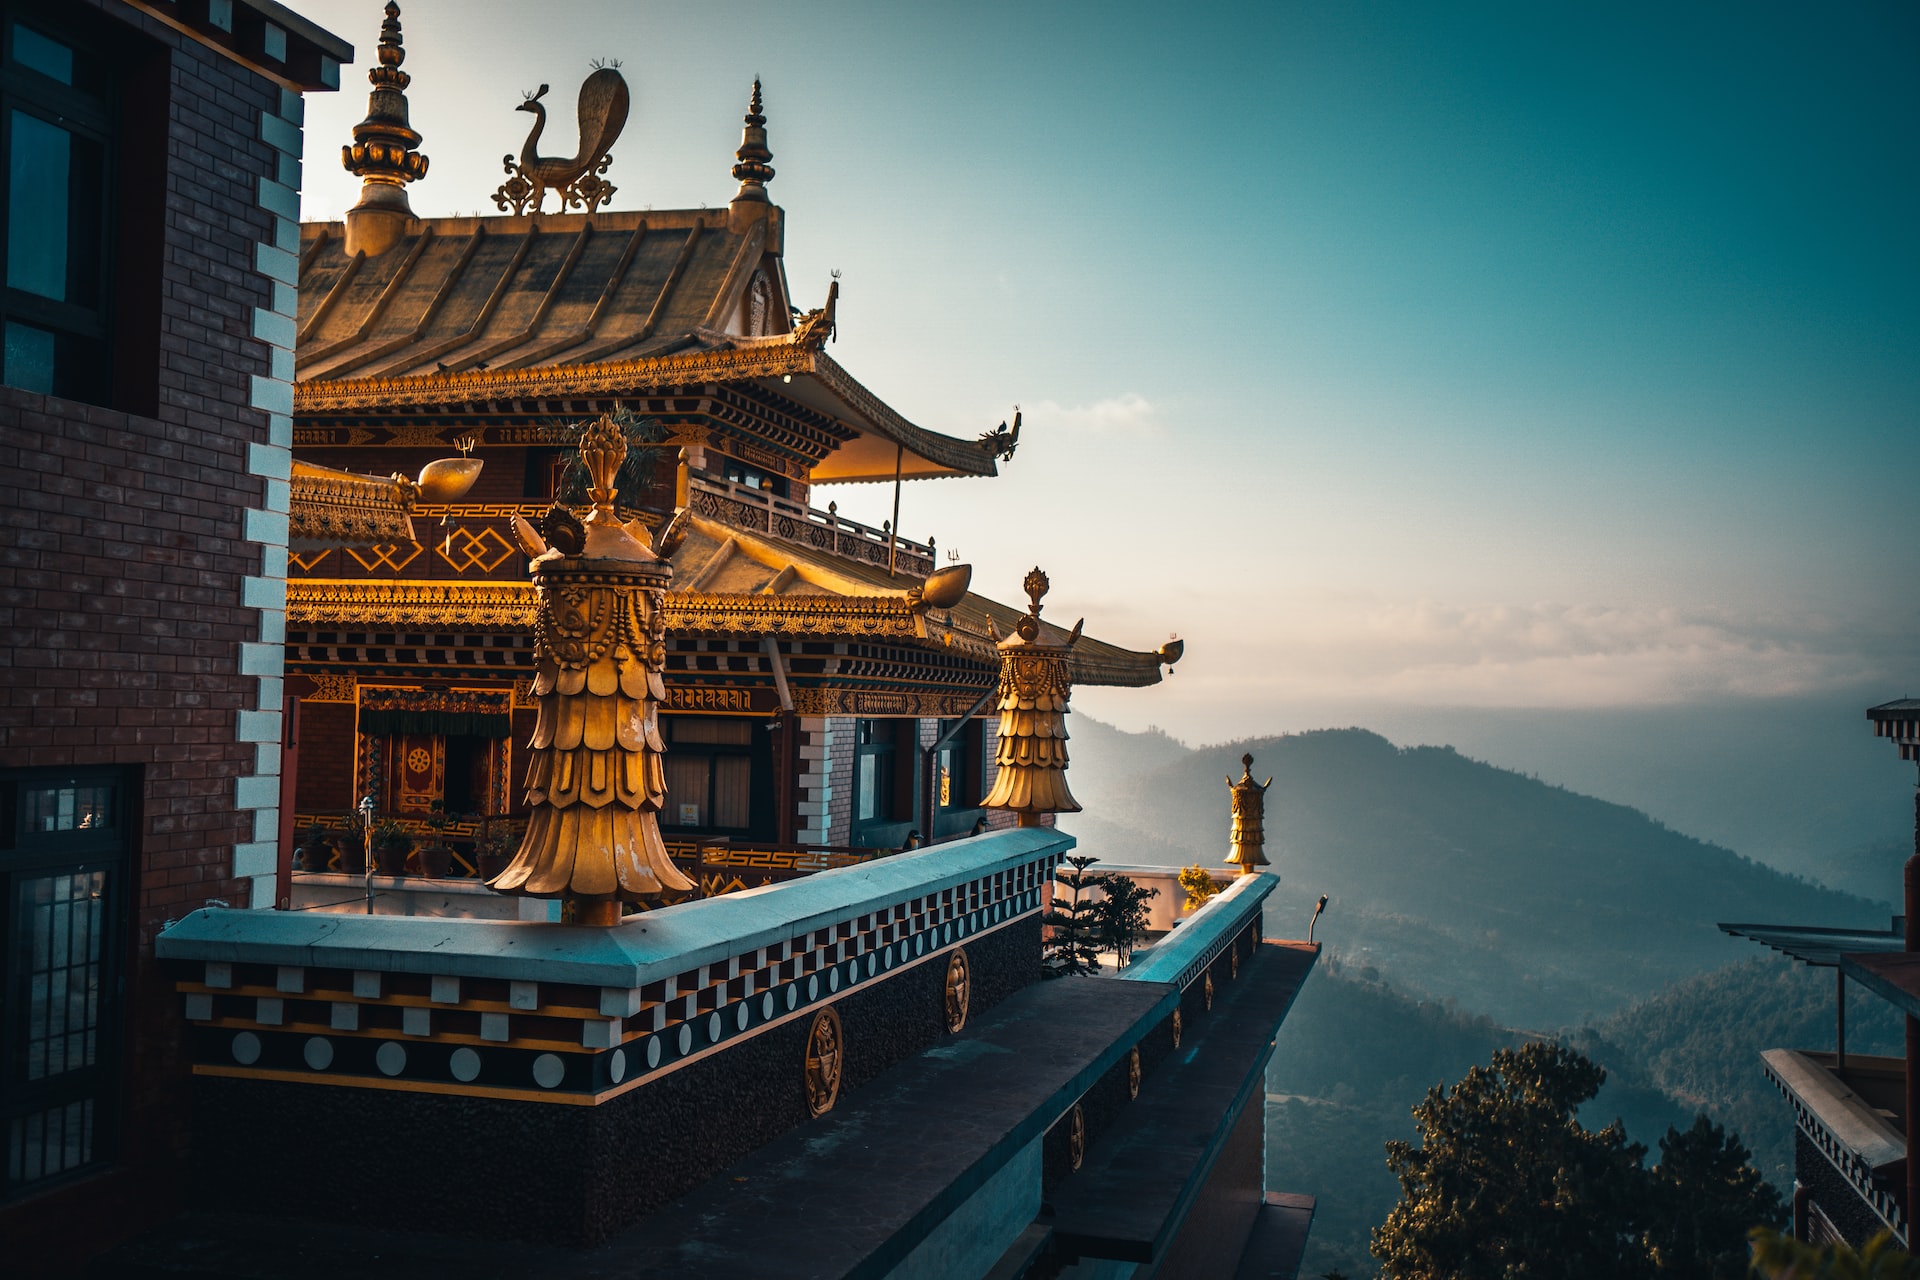 Discovering Nepal: Solo Travel in the Land of the Himalayas